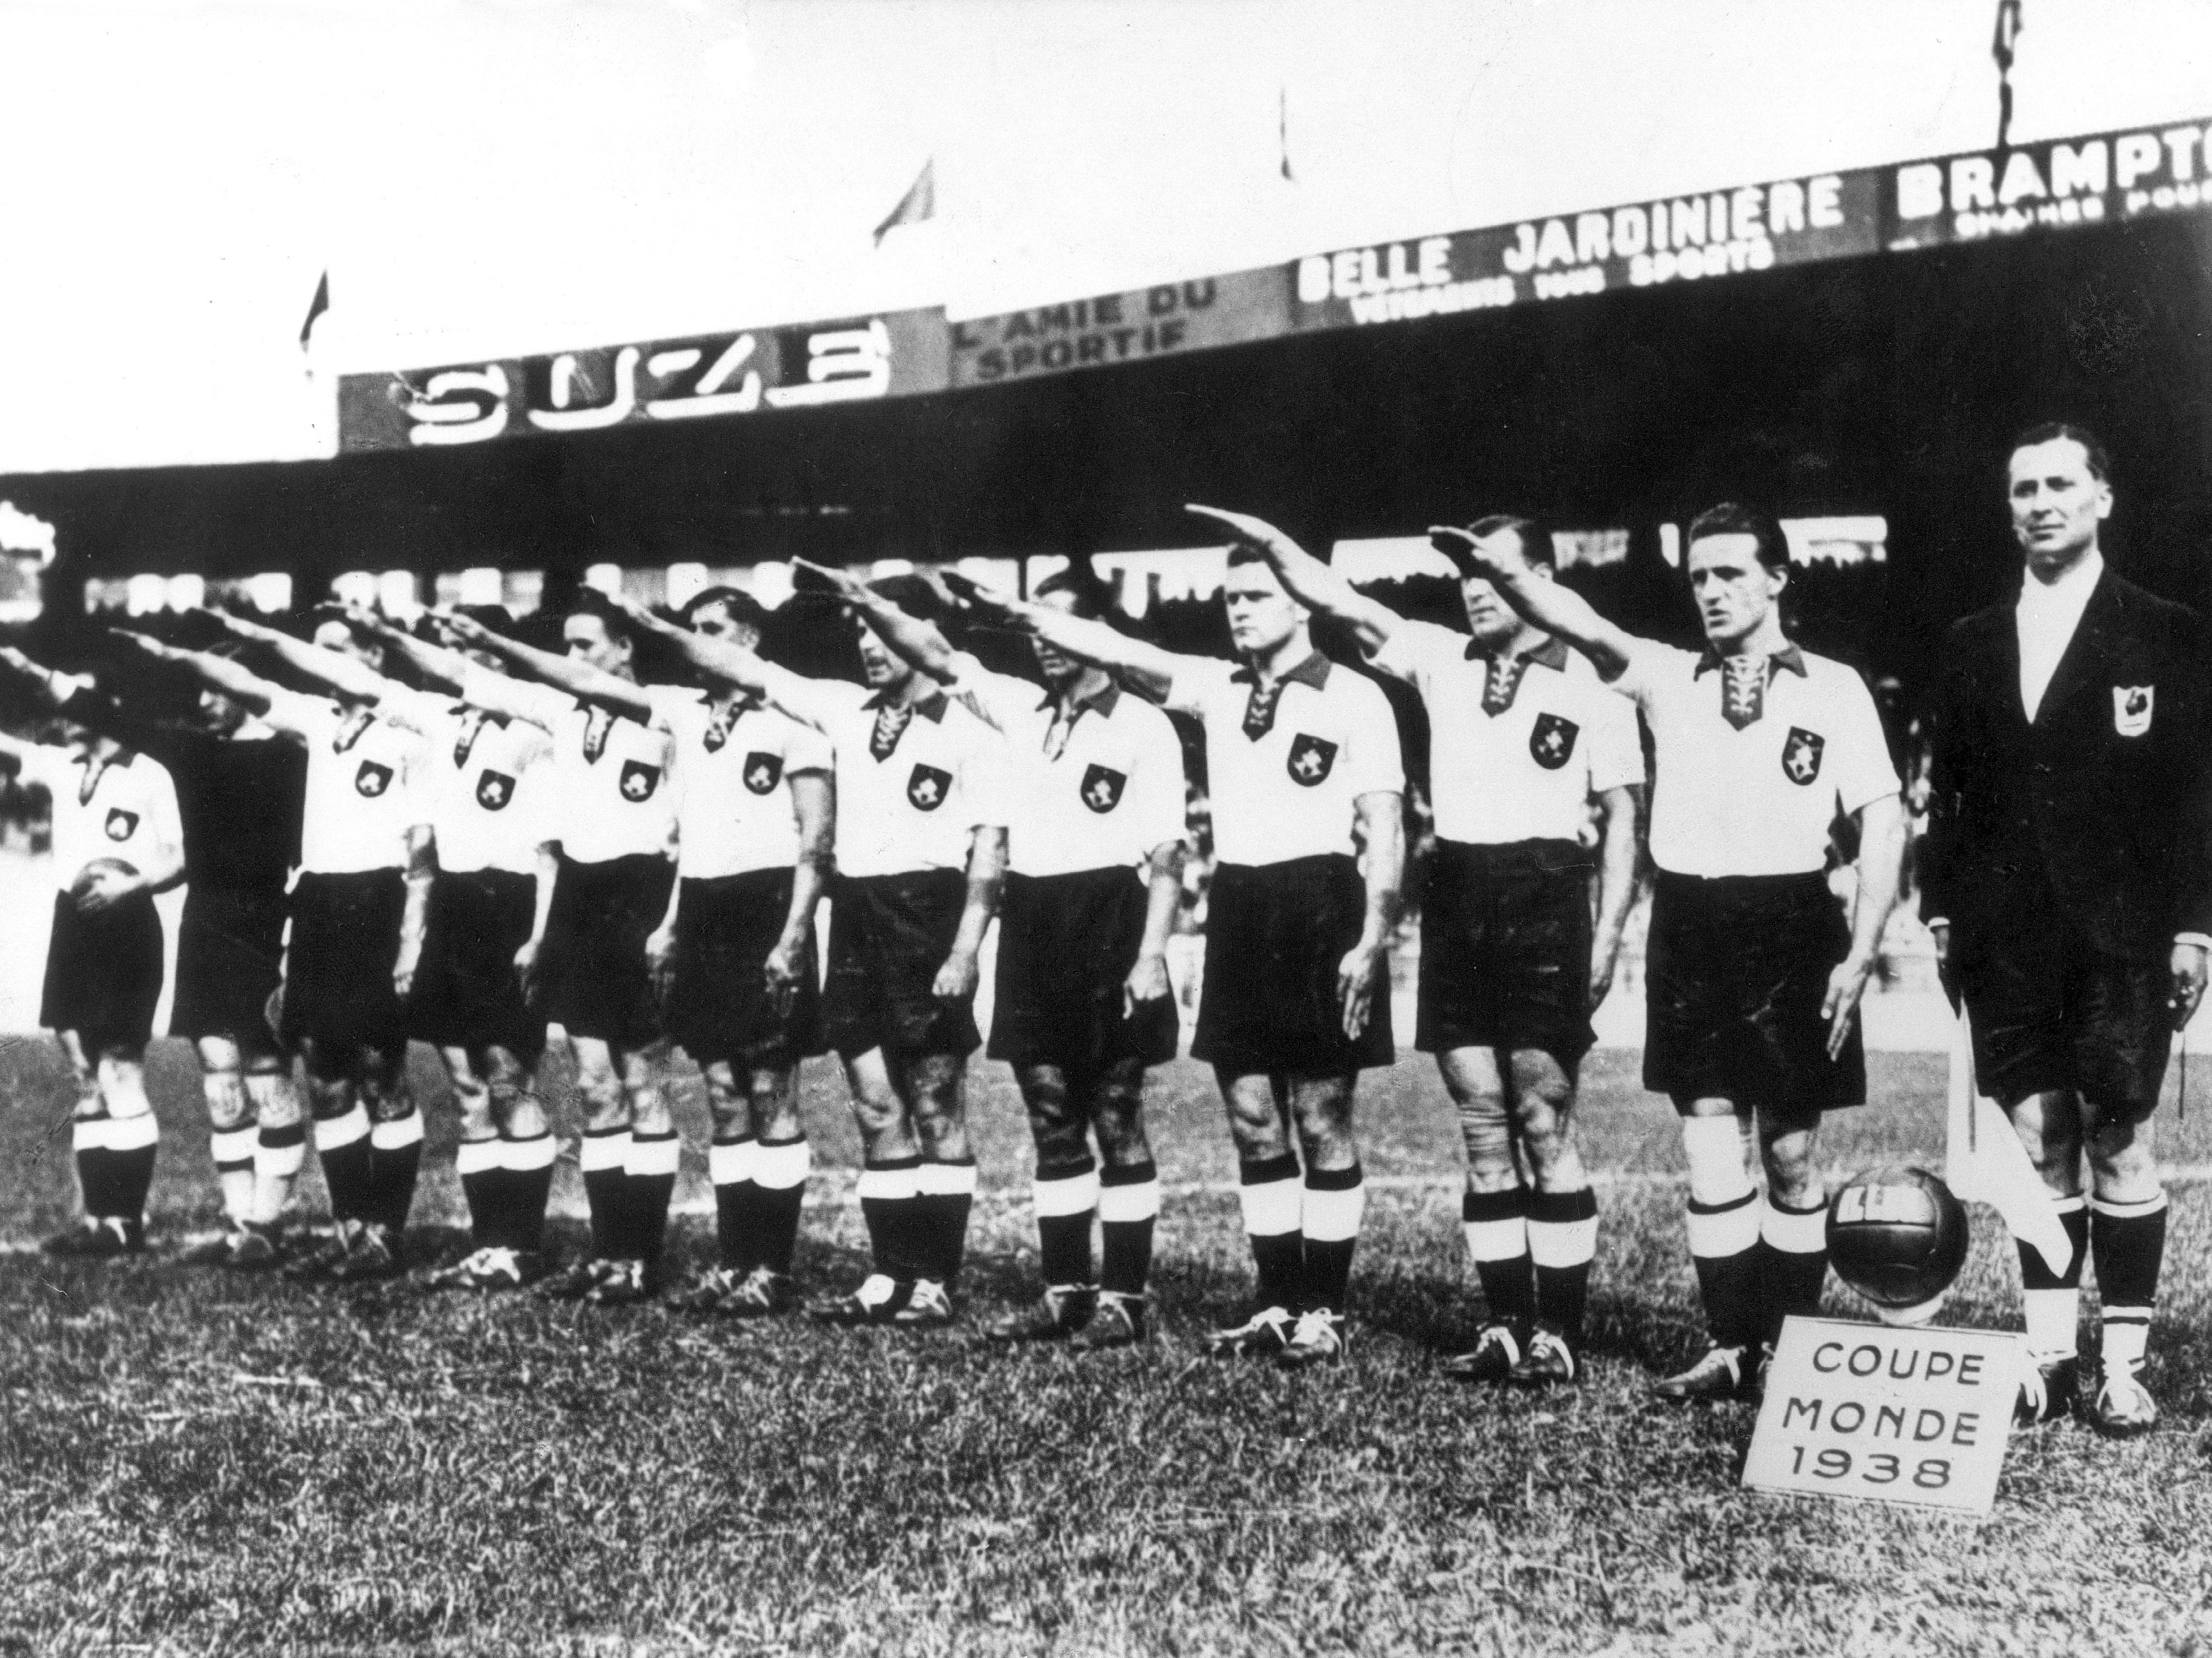 The Germany team perform a Nazi salute during the 1938 World Cup